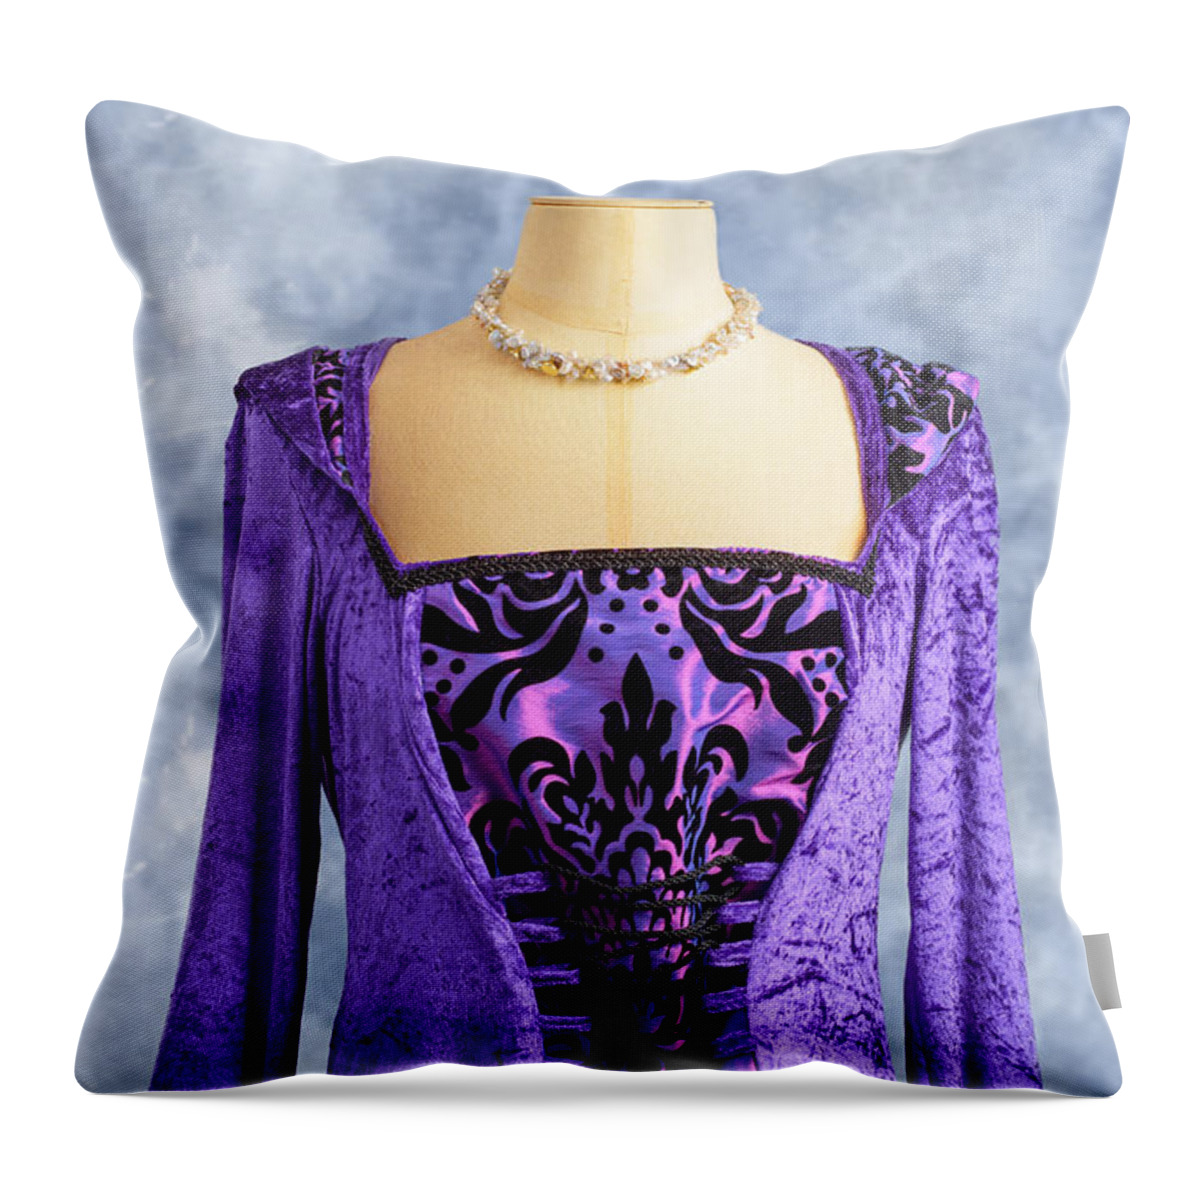 Expensive Throw Pillow featuring the photograph Necklace And Dress by Amanda Elwell